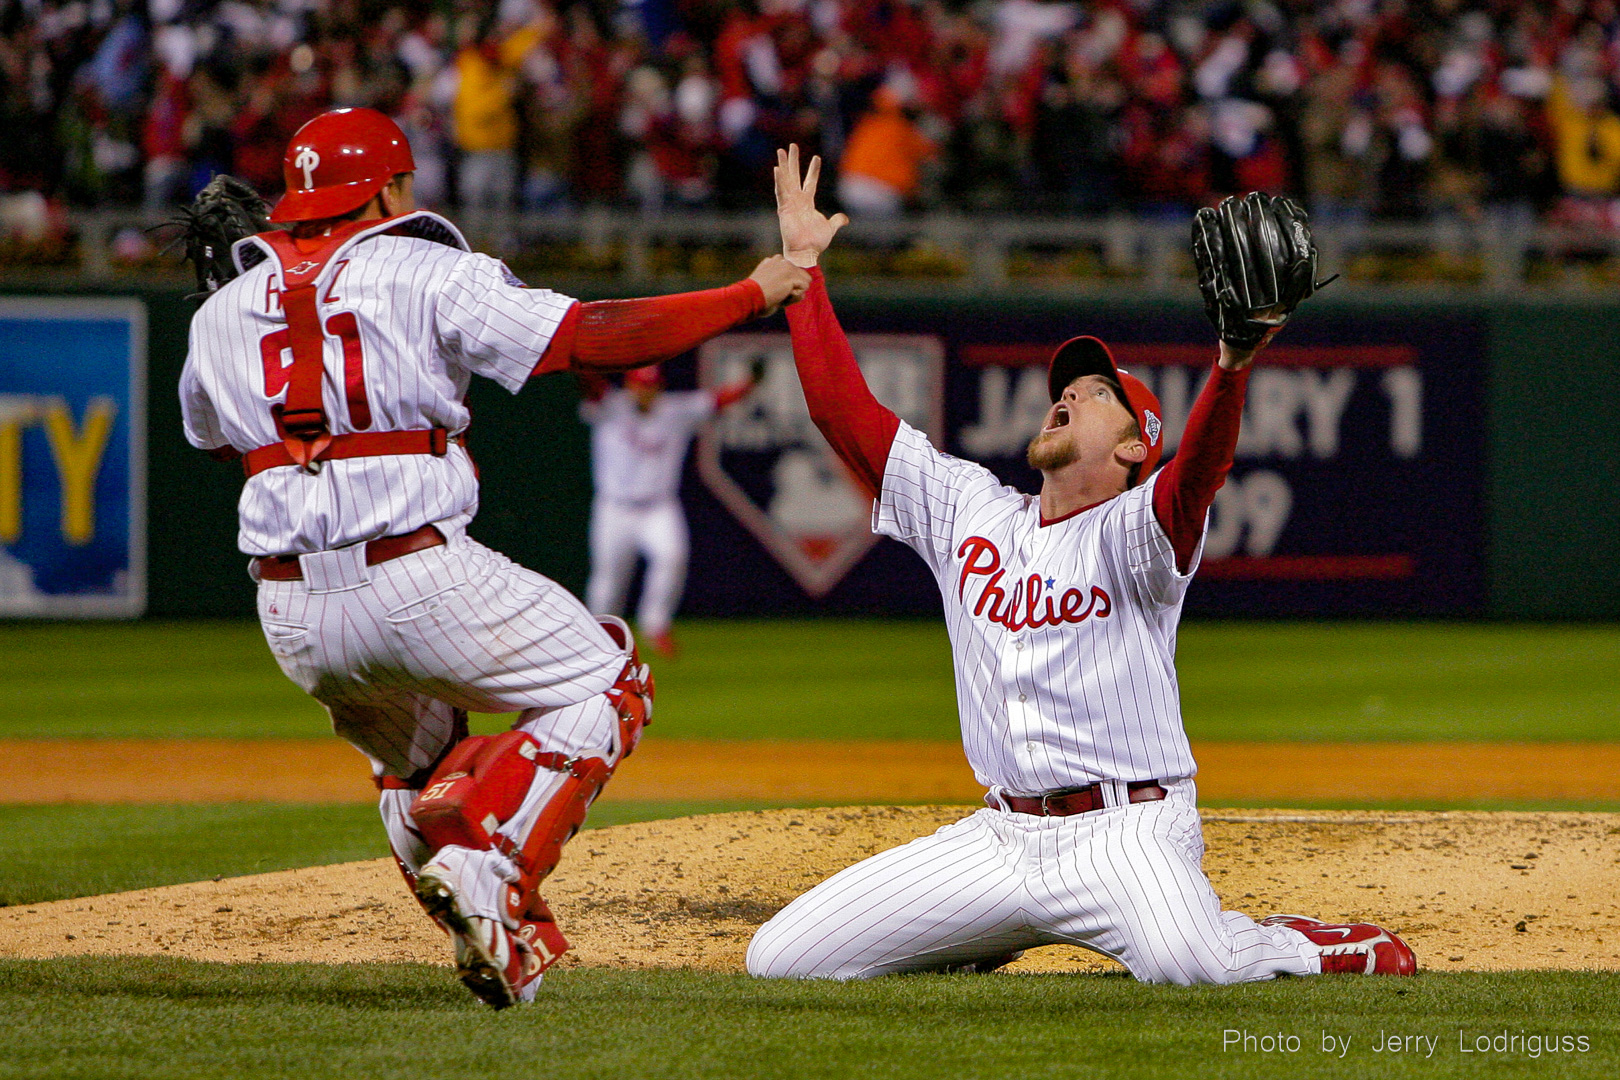 Phillies closer Brad Lidge and catcher Carlos Ruiz celebrate after Lidge struck out the Tampa Bay Rays' Eric Hinske for the final out in the ninth inning of game five of the 2008 World Series to give the Phillies the Championship on October 29, 2008.